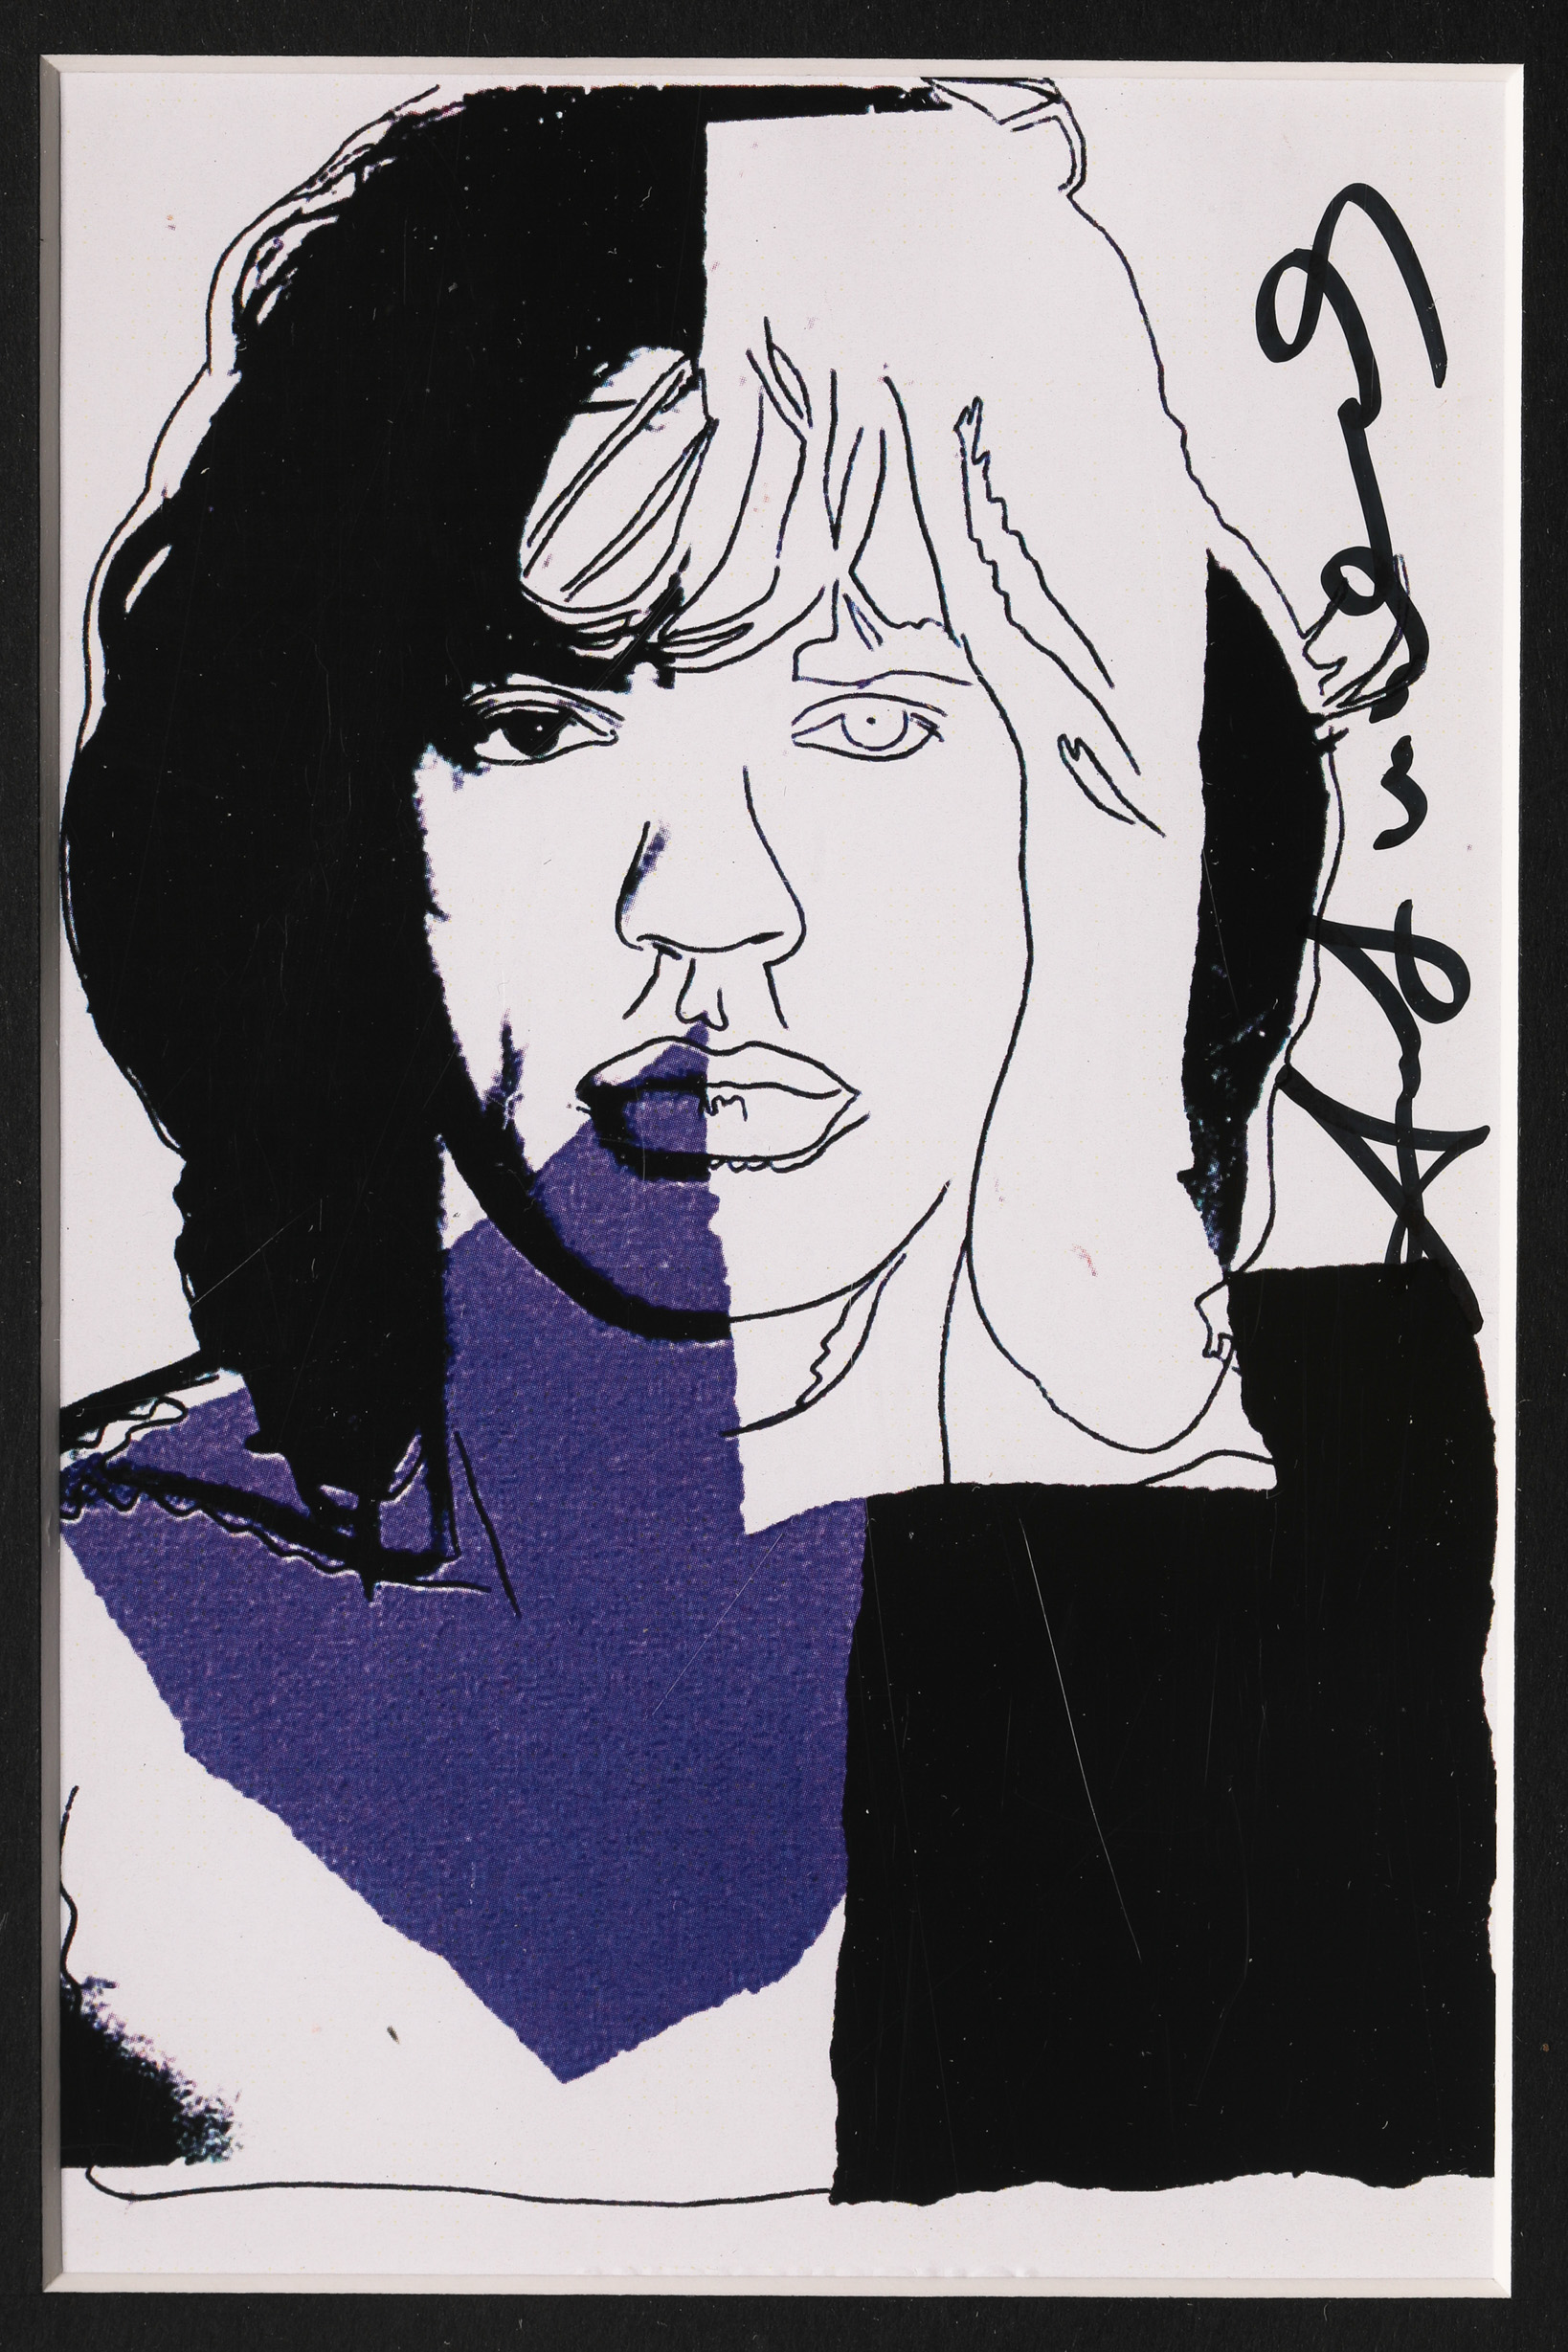 Andy Warhol, Mini Portfolio Mick Jagger with 10 Prints, 1975, signed - Image 6 of 16